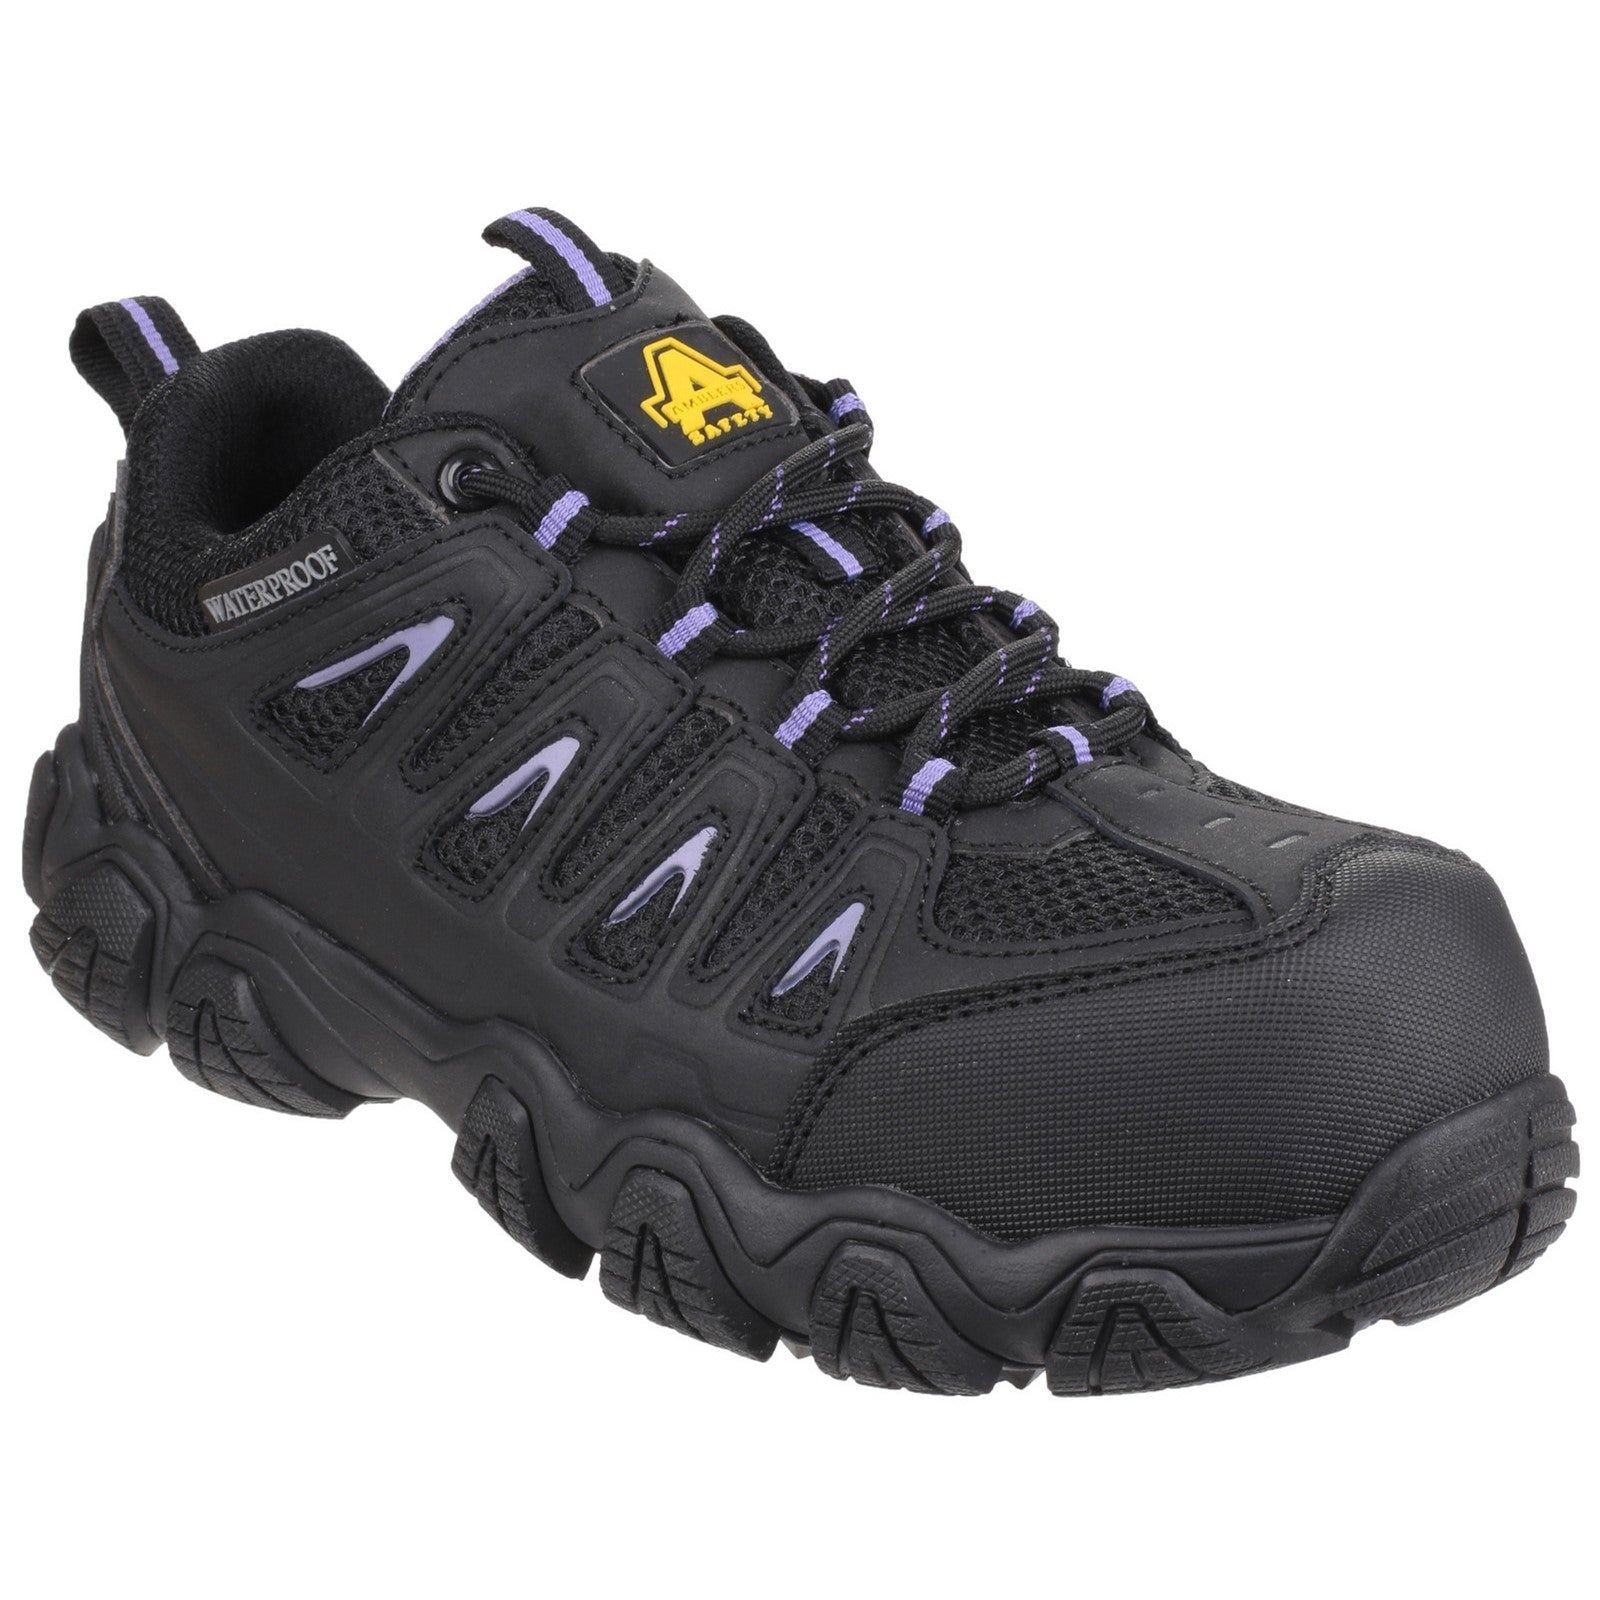 AS708 Waterproof Non-Metal Ladies Safety Trainer, Amblers Safety